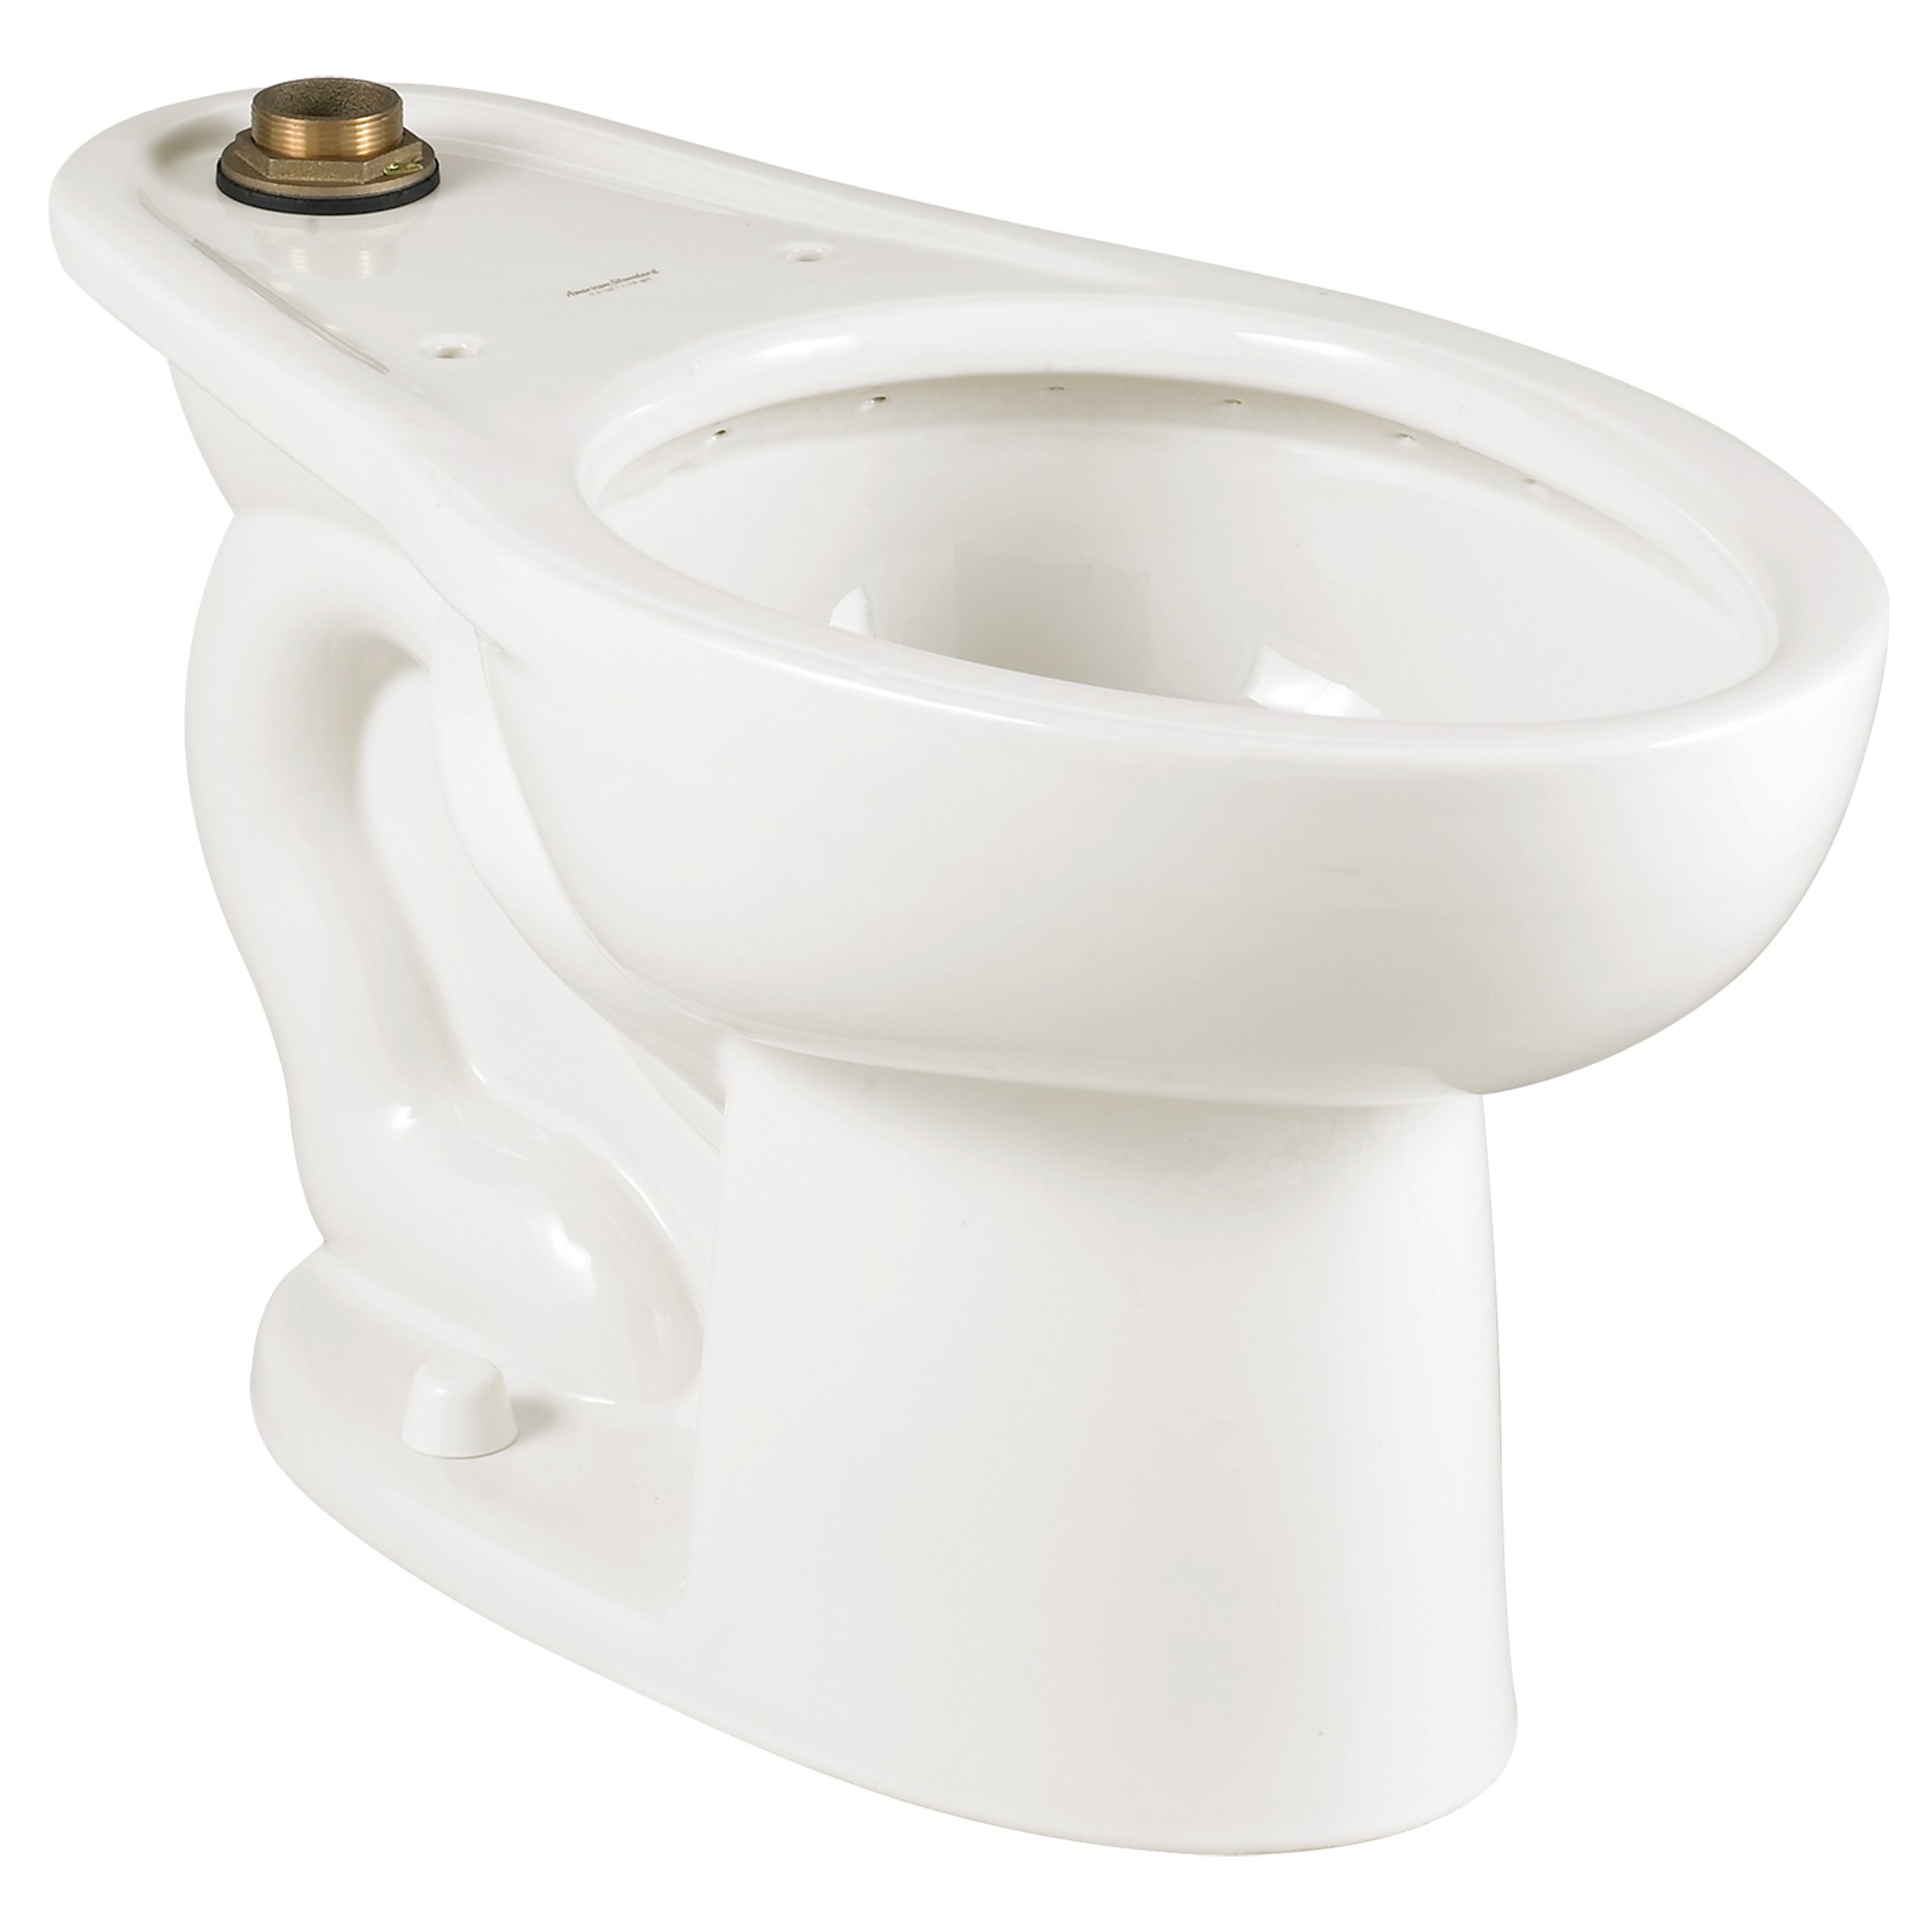 American Standard | 3451.001.020 | AMERICAN STANDARD 3451.001 MADERA ELONGATED UNIVERSAL TOP-SPUD BOWL FOR HIGH-EFFICIENCY TOILET WHT 020 WHITE 1.1-1.6GPF